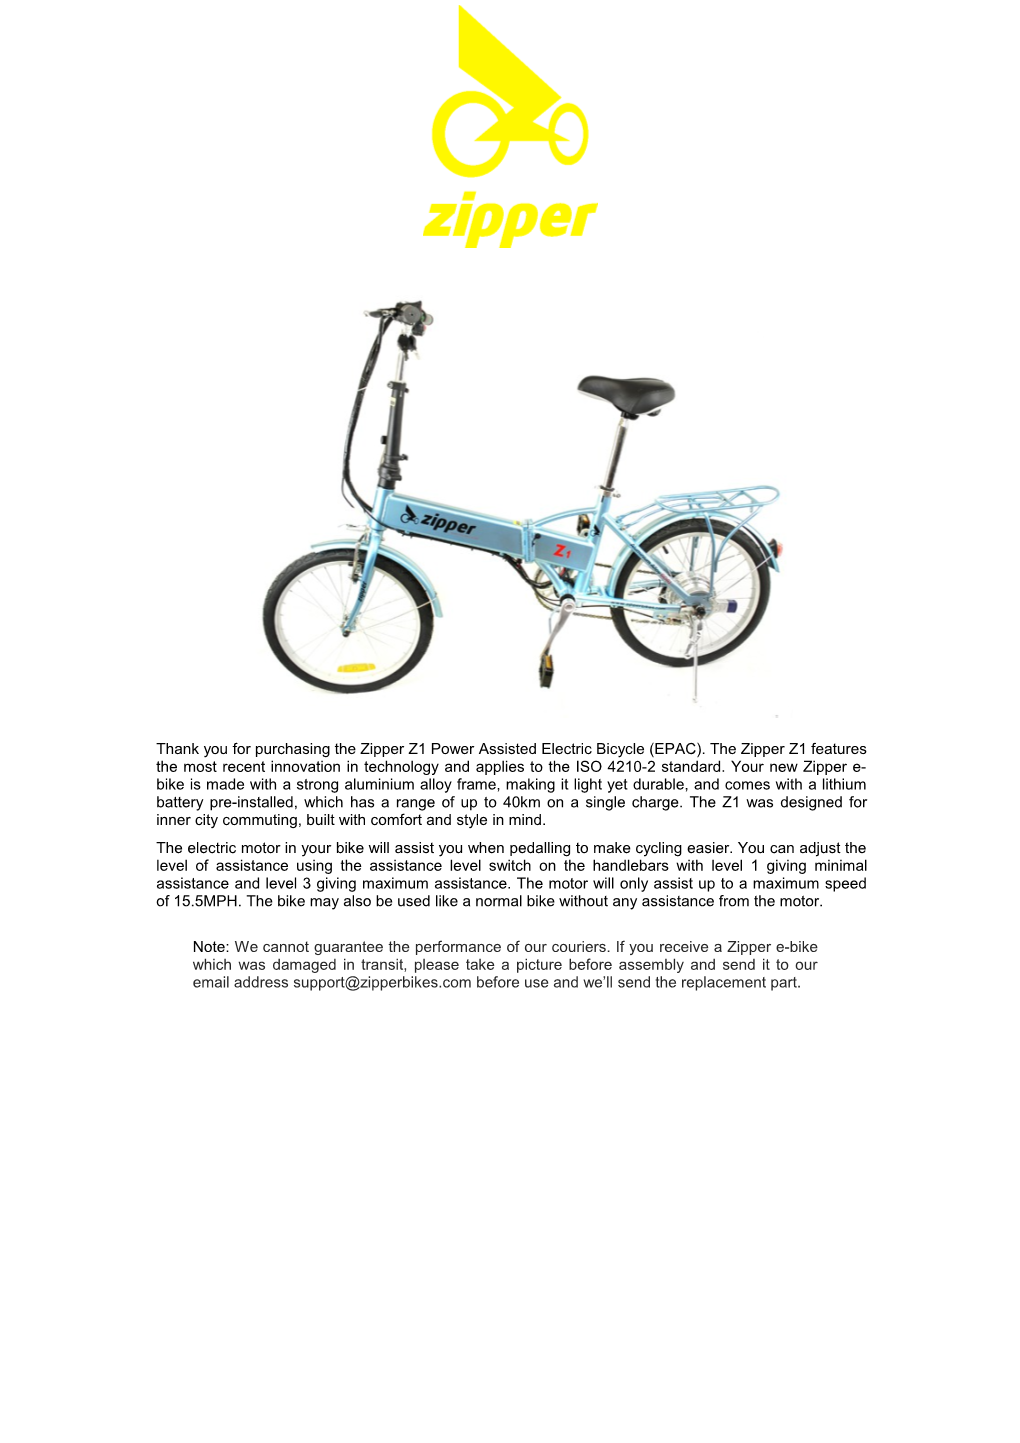 Thank You for Purchasing the Zipper Z1 Power Assisted Electric Bicycle (EPAC). the Zipper